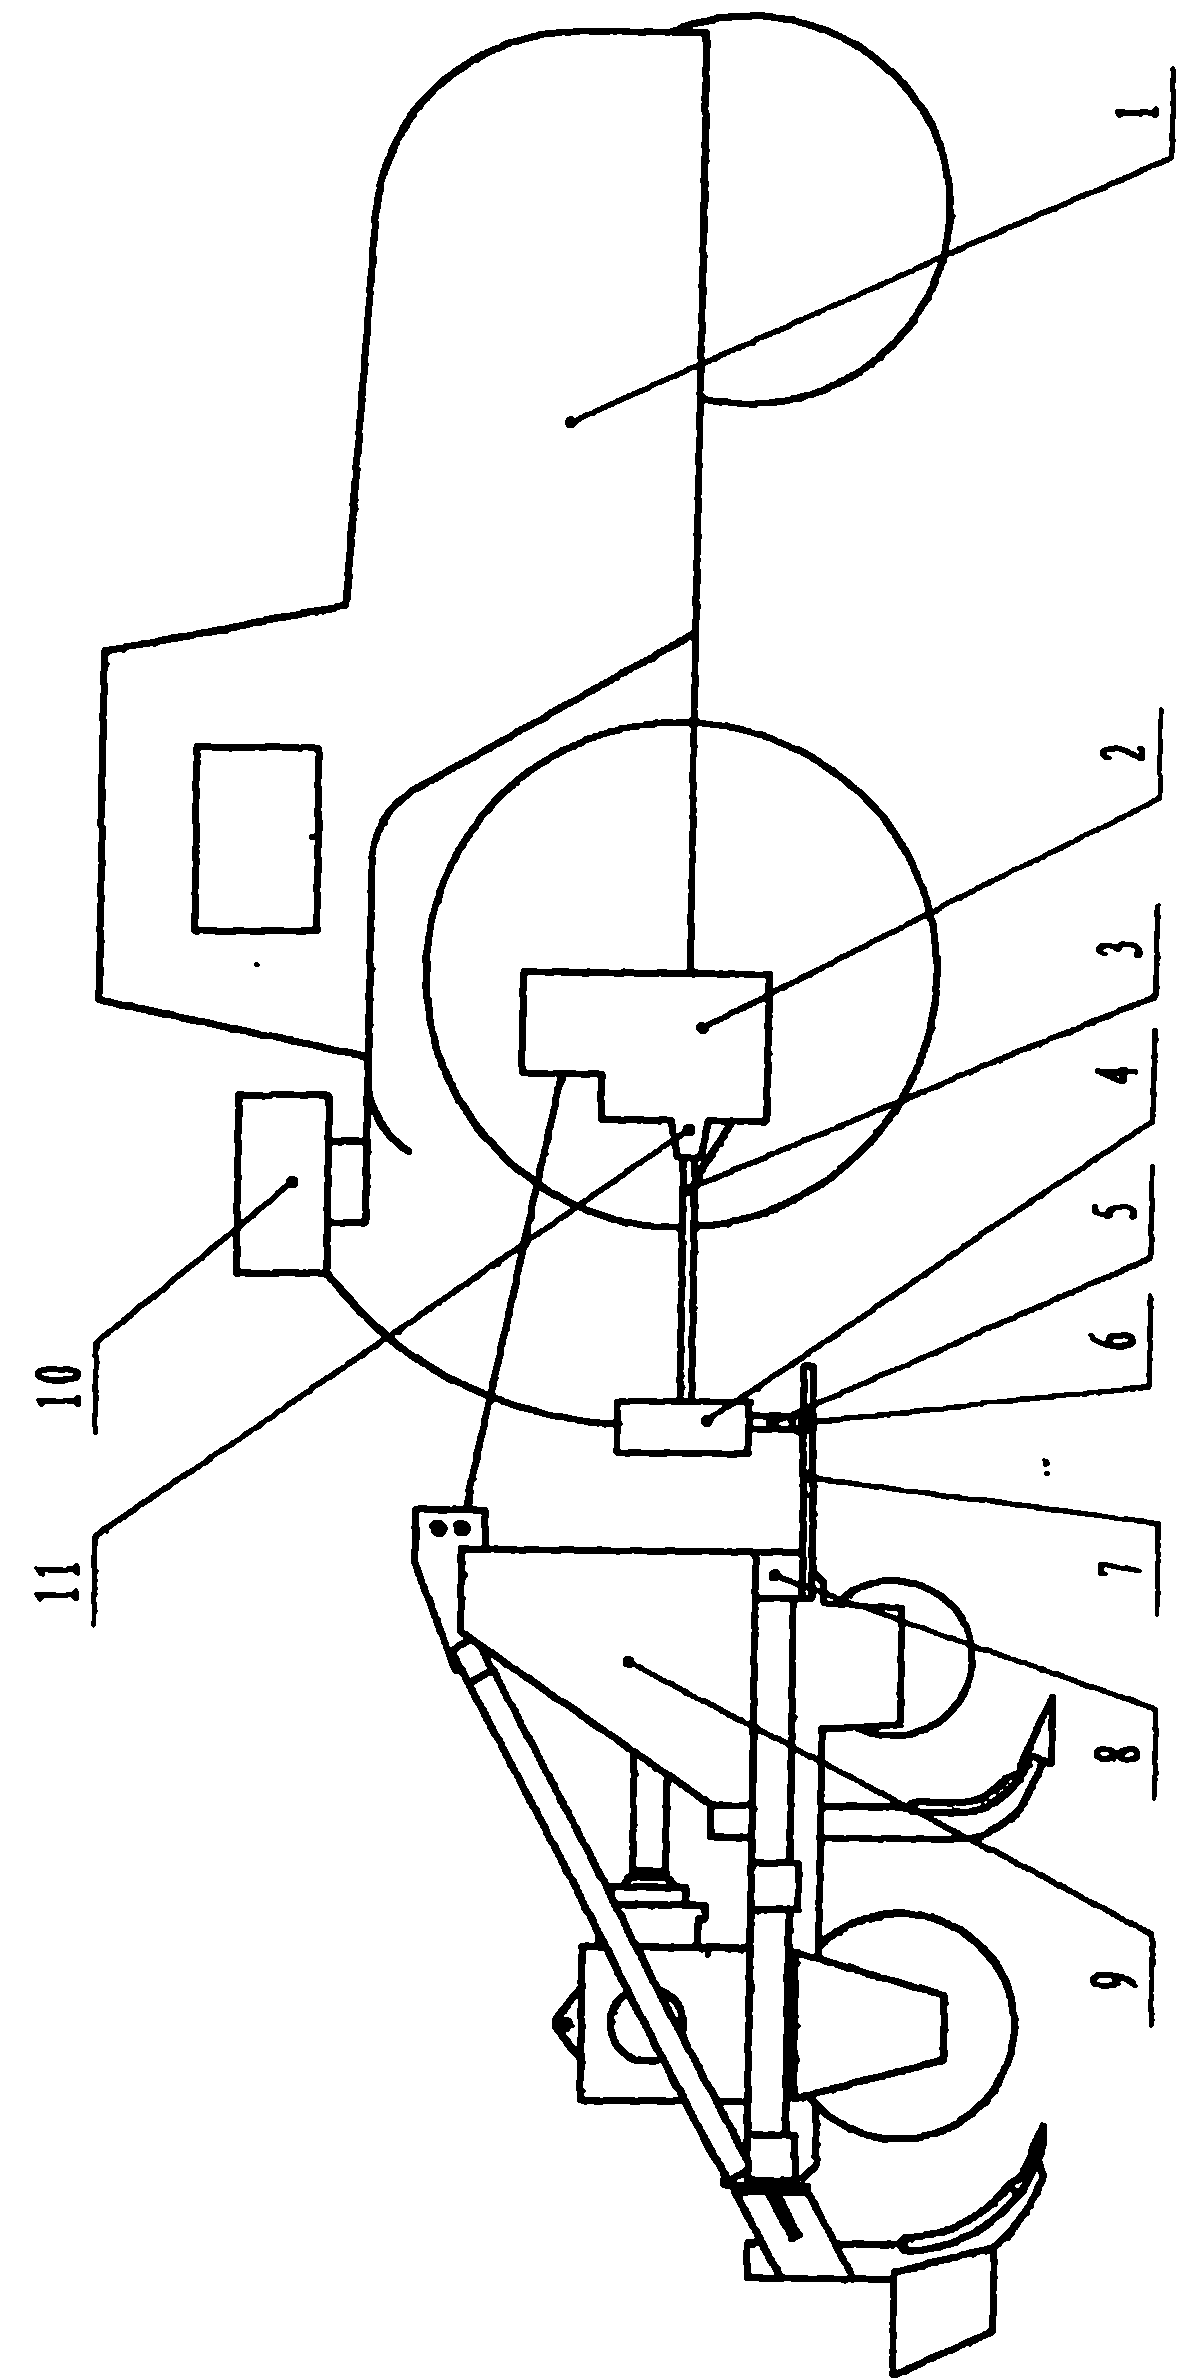 Soil tillage depth automatic measurement and synchronous display device for tillage implement